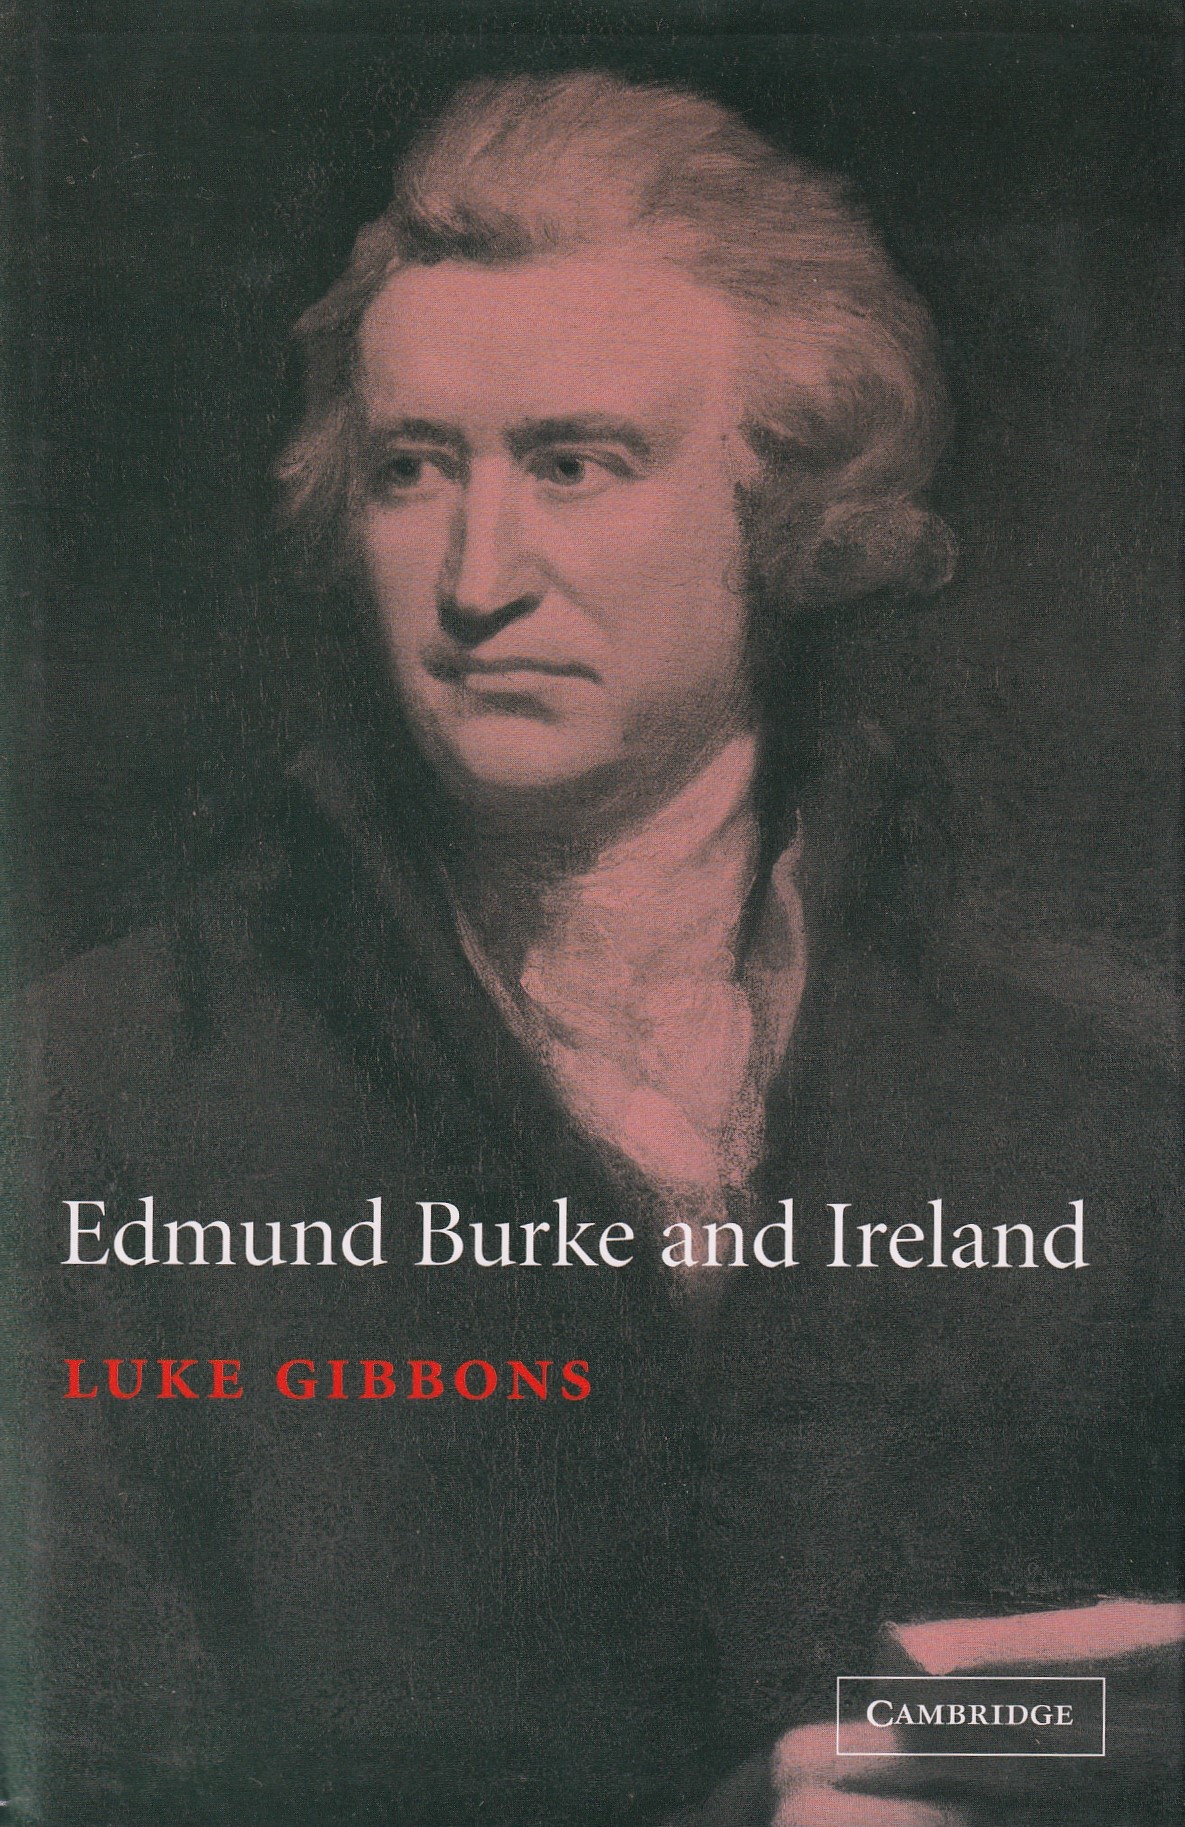 Edmund Burke and Ireland: Aesthetics, politics, and the colonial sublime | Luke Gibbons | Charlie Byrne's